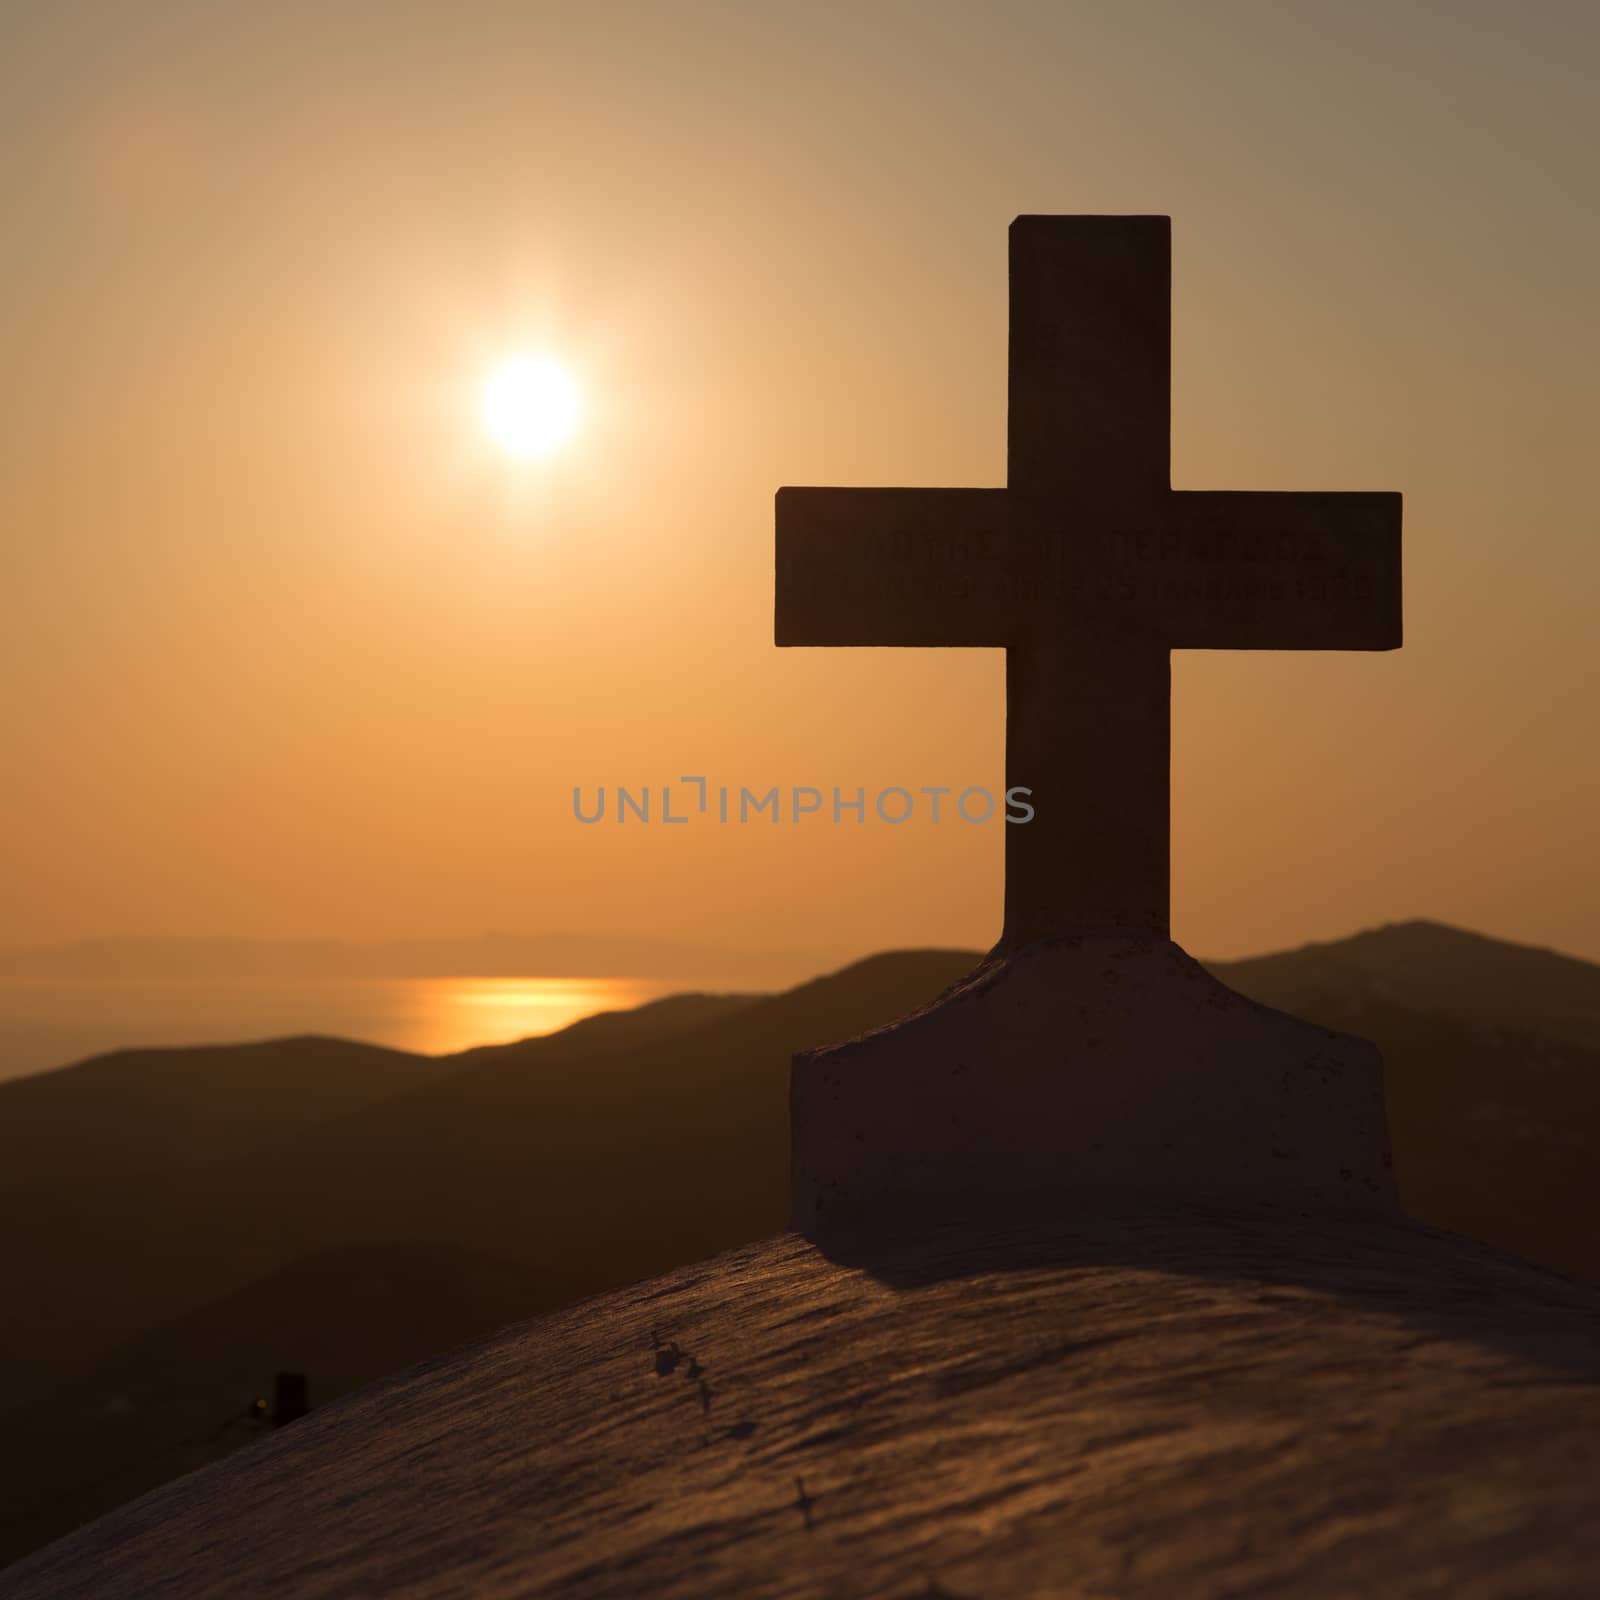 Sunset and the cross of the church at the top of the hill in Chora, Folegandros